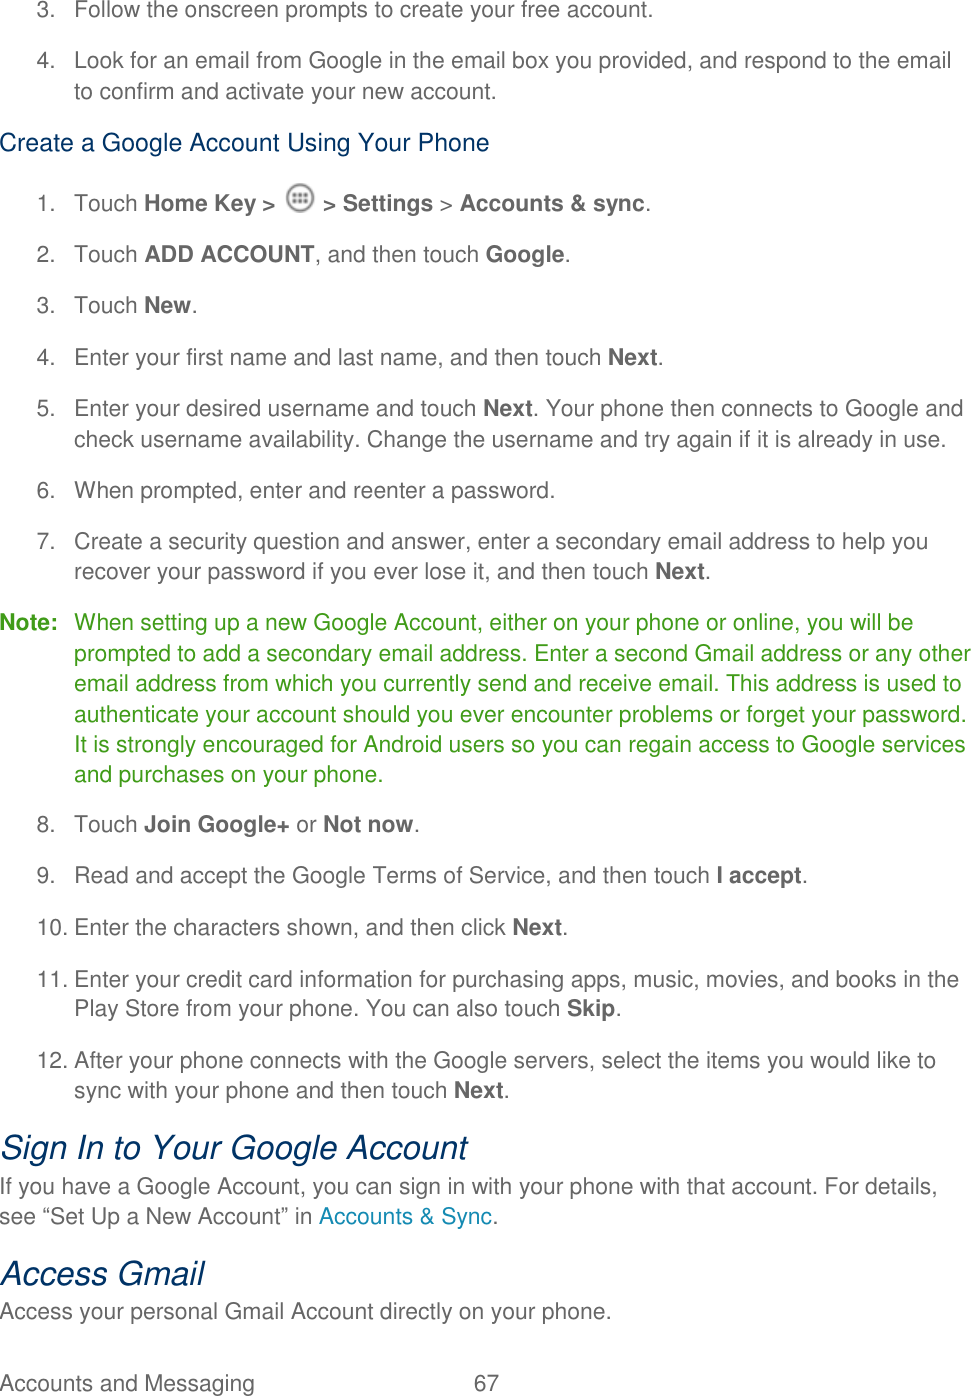 Accounts and Messaging  67   3.  Follow the onscreen prompts to create your free account. 4.  Look for an email from Google in the email box you provided, and respond to the email to confirm and activate your new account. Create a Google Account Using Your Phone 1.  Touch Home Key &gt;   &gt; Settings &gt; Accounts &amp; sync. 2.  Touch ADD ACCOUNT, and then touch Google.  3.  Touch New. 4.  Enter your first name and last name, and then touch Next.  5.  Enter your desired username and touch Next. Your phone then connects to Google and check username availability. Change the username and try again if it is already in use. 6.  When prompted, enter and reenter a password. 7.  Create a security question and answer, enter a secondary email address to help you recover your password if you ever lose it, and then touch Next.  Note:  When setting up a new Google Account, either on your phone or online, you will be prompted to add a secondary email address. Enter a second Gmail address or any other email address from which you currently send and receive email. This address is used to authenticate your account should you ever encounter problems or forget your password. It is strongly encouraged for Android users so you can regain access to Google services and purchases on your phone. 8.  Touch Join Google+ or Not now. 9.  Read and accept the Google Terms of Service, and then touch I accept.  10. Enter the characters shown, and then click Next. 11. Enter your credit card information for purchasing apps, music, movies, and books in the Play Store from your phone. You can also touch Skip. 12. After your phone connects with the Google servers, select the items you would like to sync with your phone and then touch Next.  Sign In to Your Google Account If you have a Google Account, you can sign in with your phone with that account. For details, see “Set Up a New Account” in Accounts &amp; Sync. Access Gmail Access your personal Gmail Account directly on your phone. 